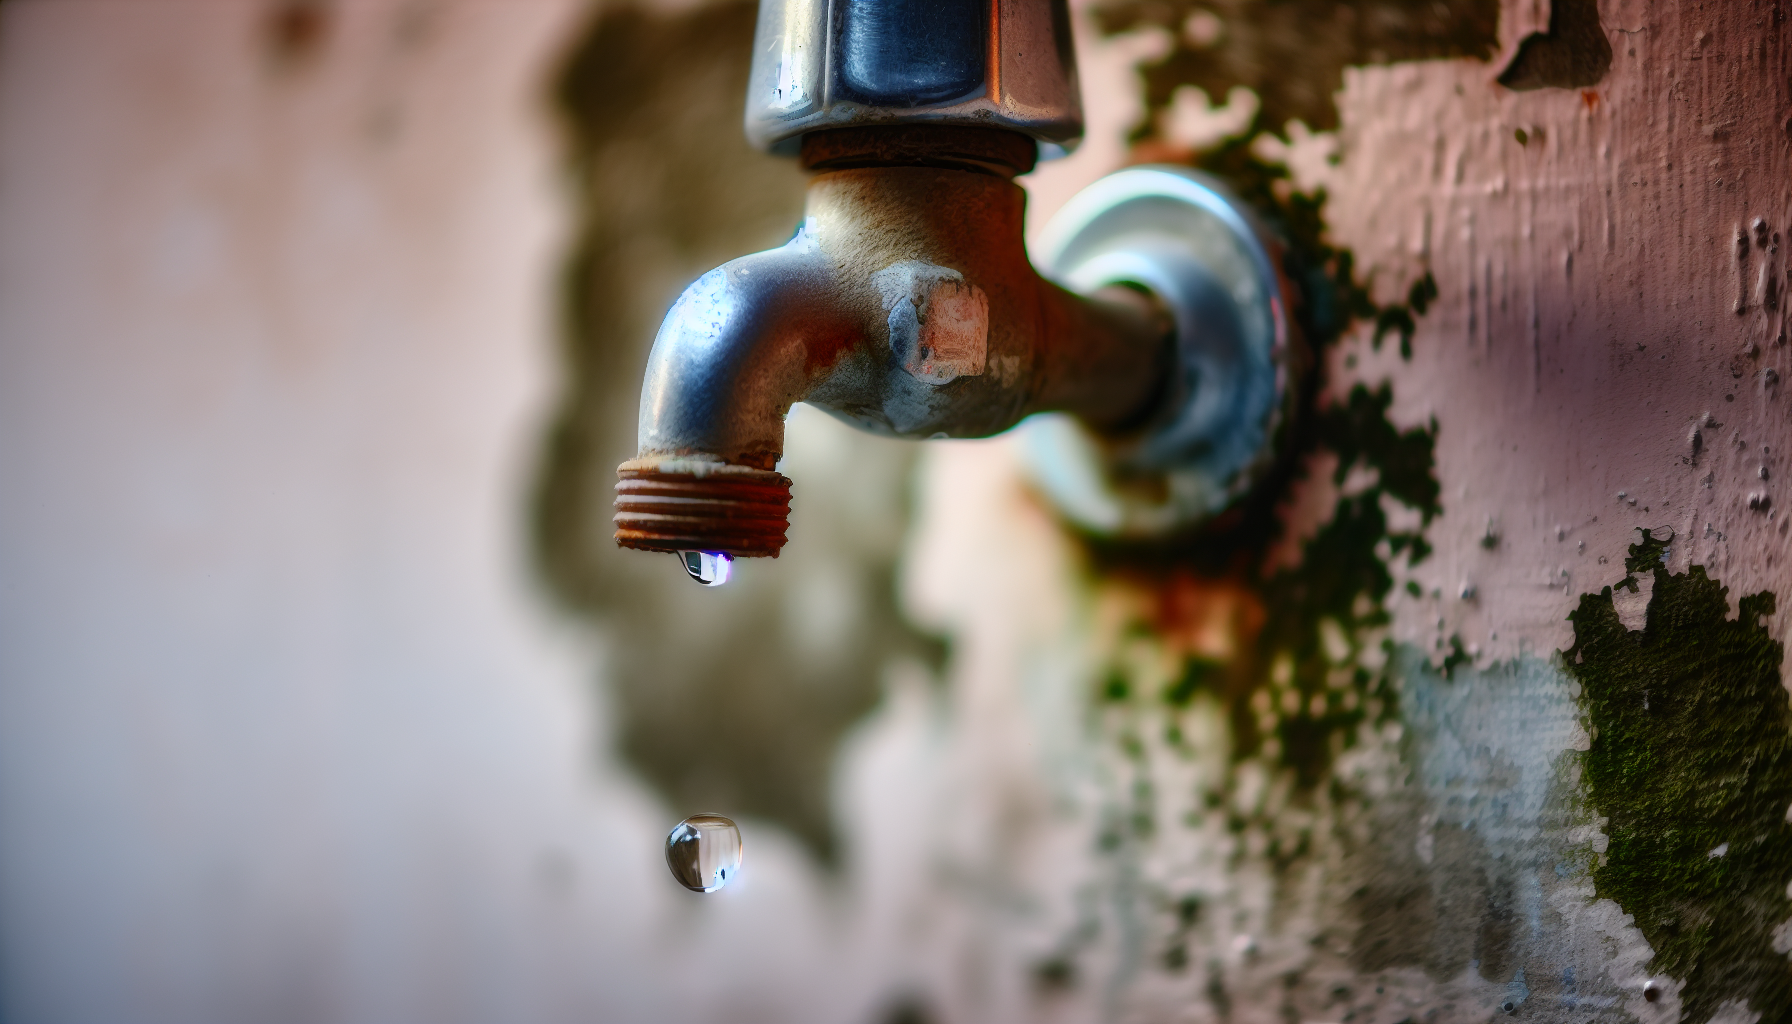 Dripping tap with a worn tap washer